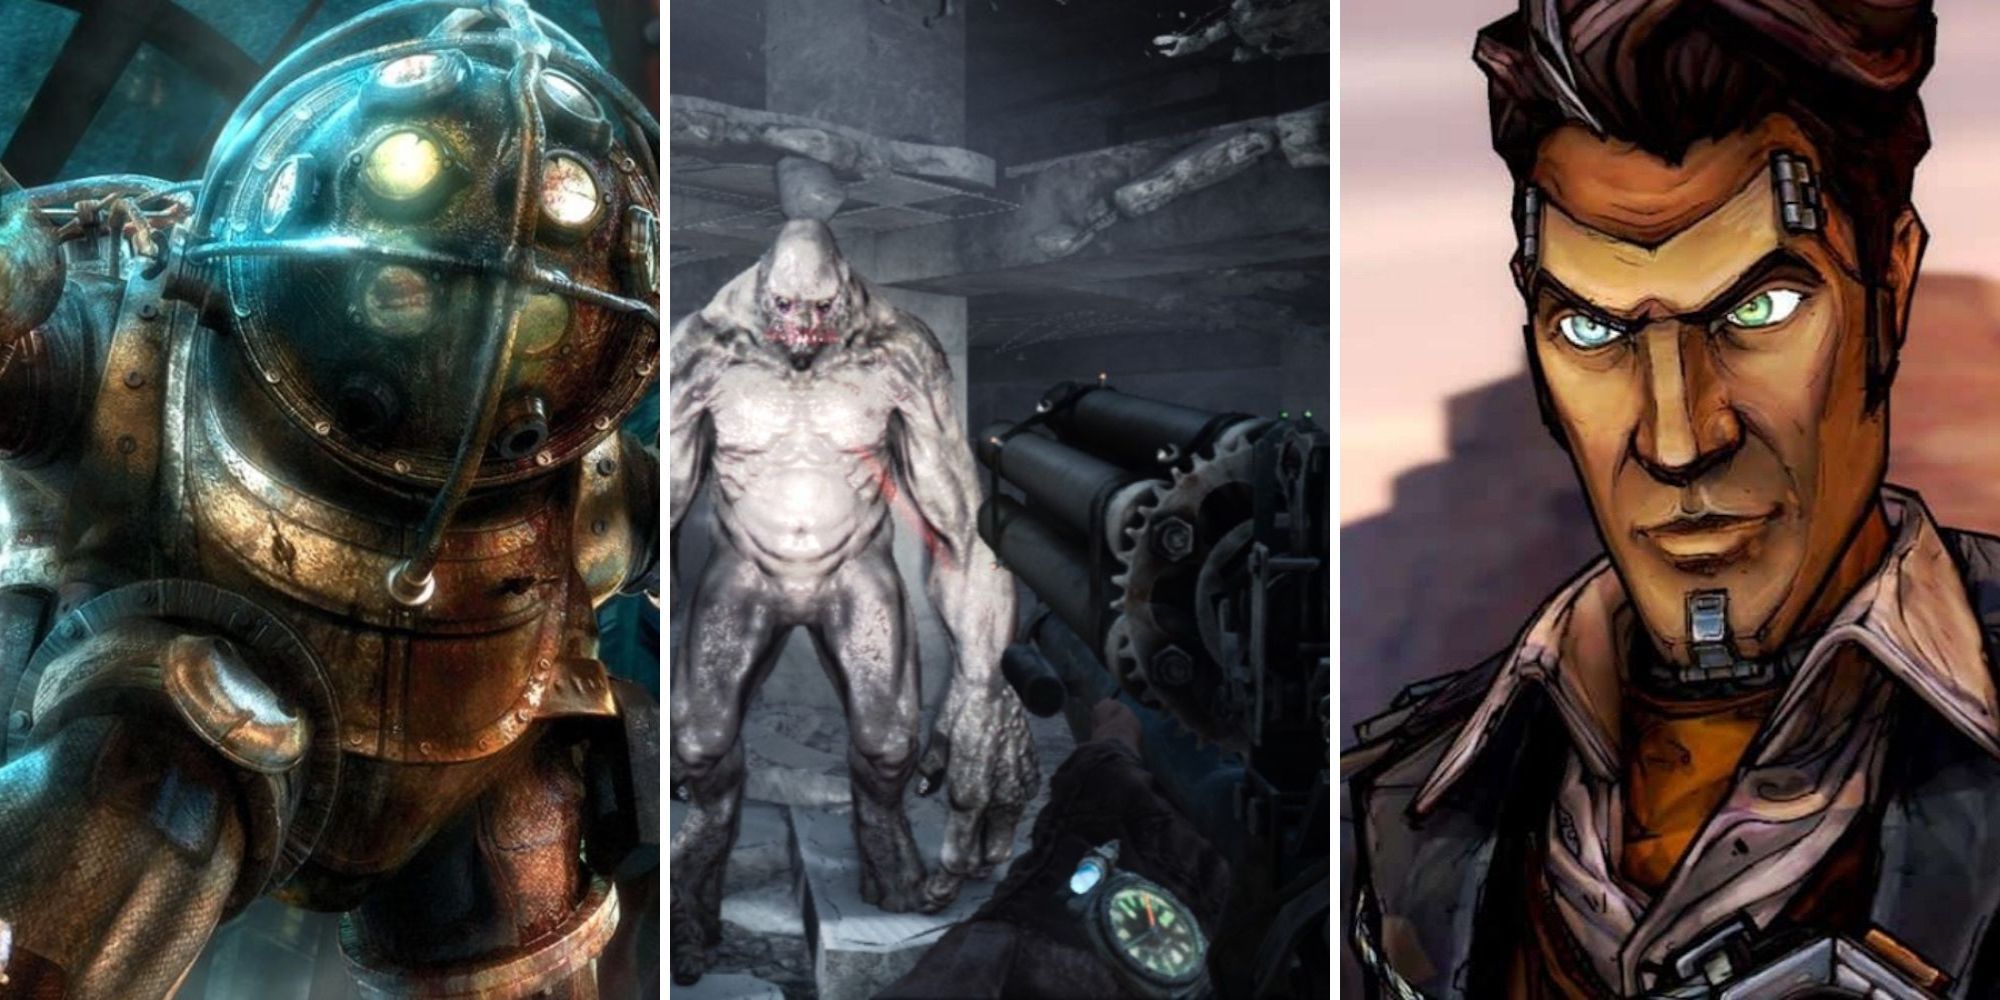 A grid showing the first-person shooter games Bioshock, Metro 2033, and Borderlands 2